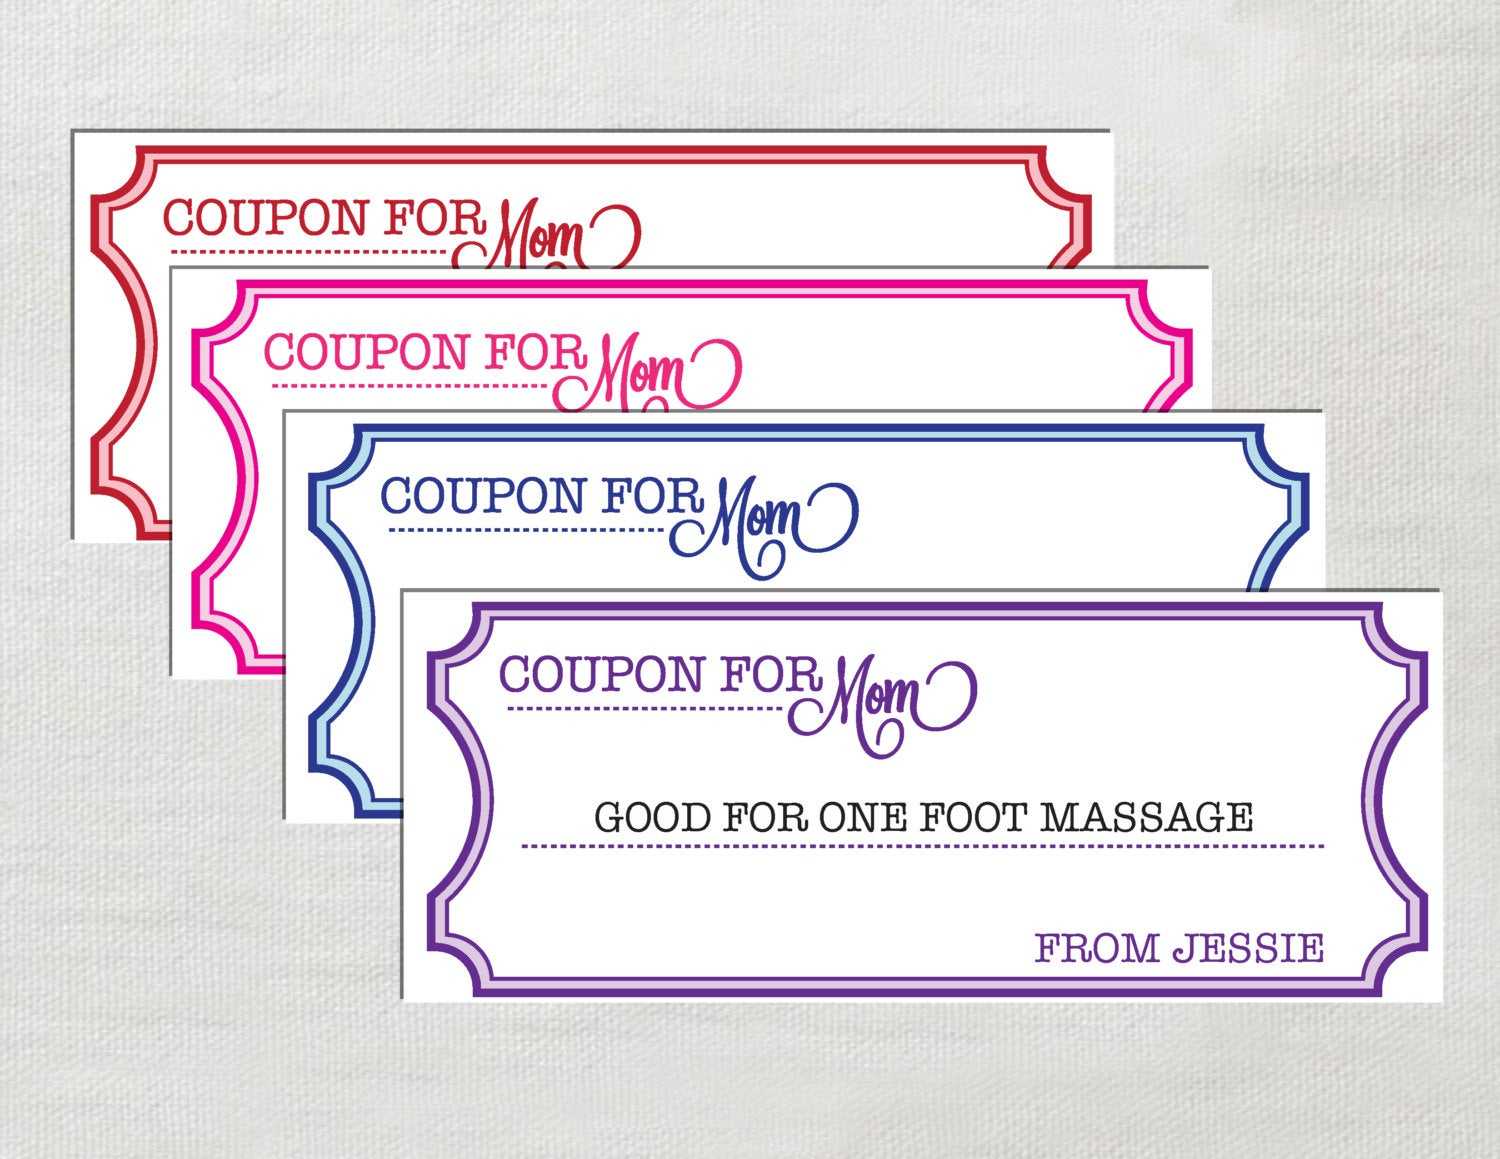 Coupon Template Free Word ] – Doc 585450 Coupon Template For With Regard To Love Coupon Template For Word